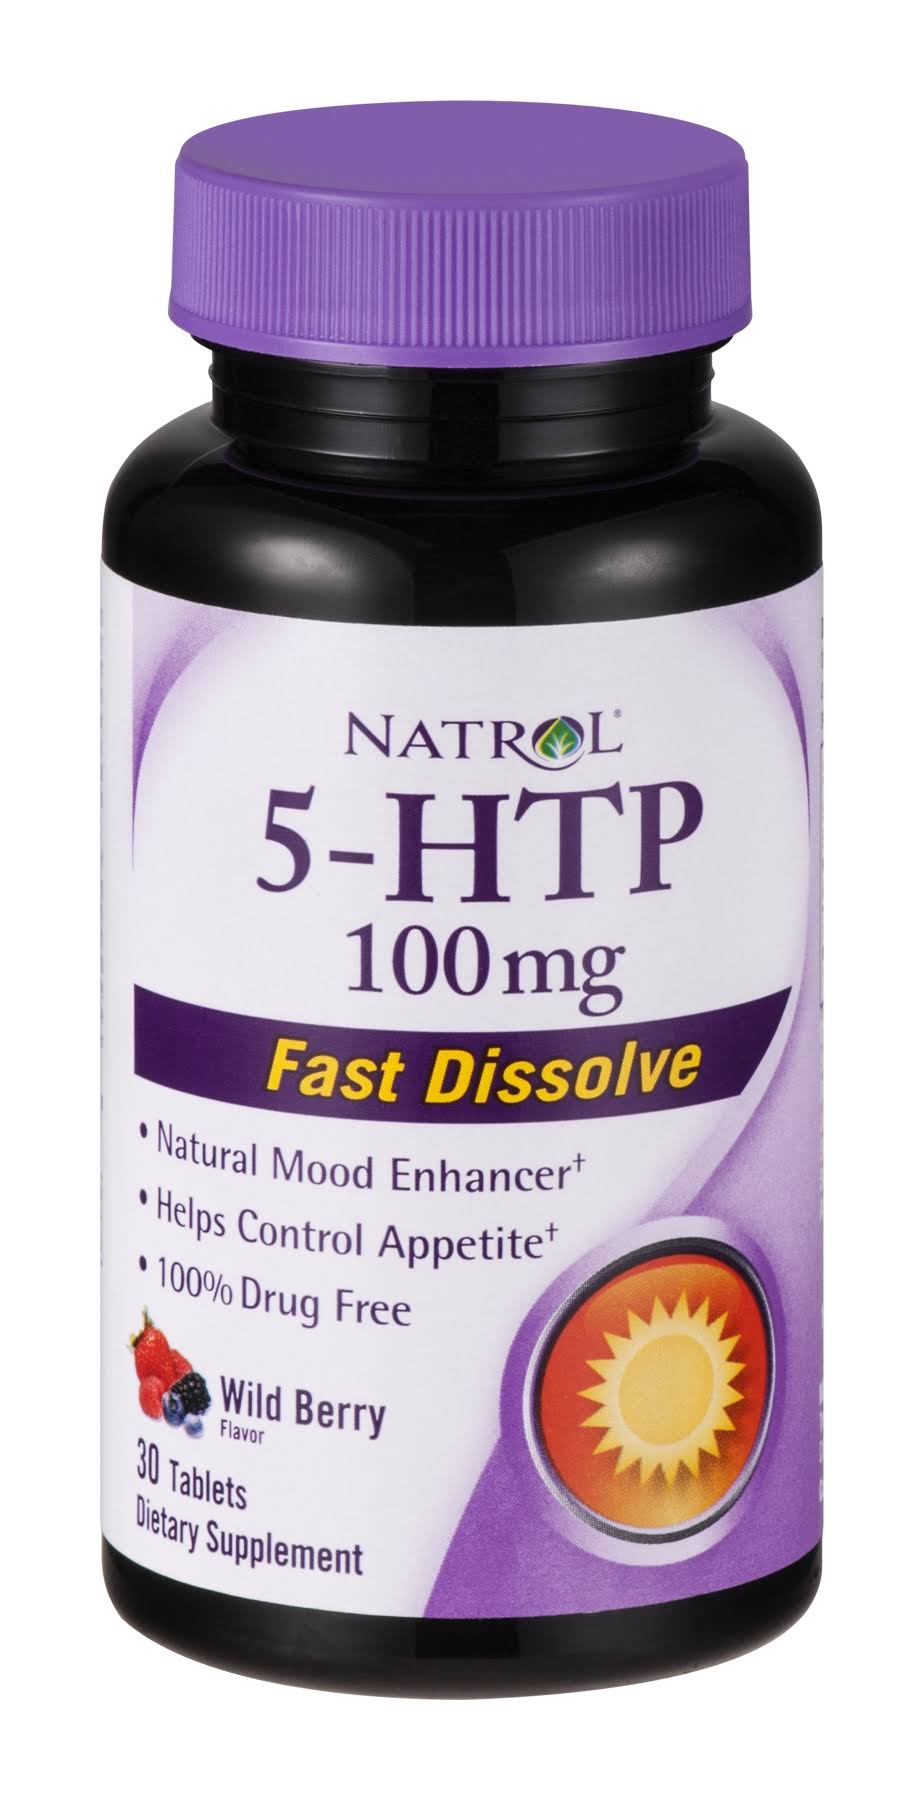 Natrol 5-HTP 100mg Fast Dissolve Dietary Supplement - Wild Berry, 30 Tablets